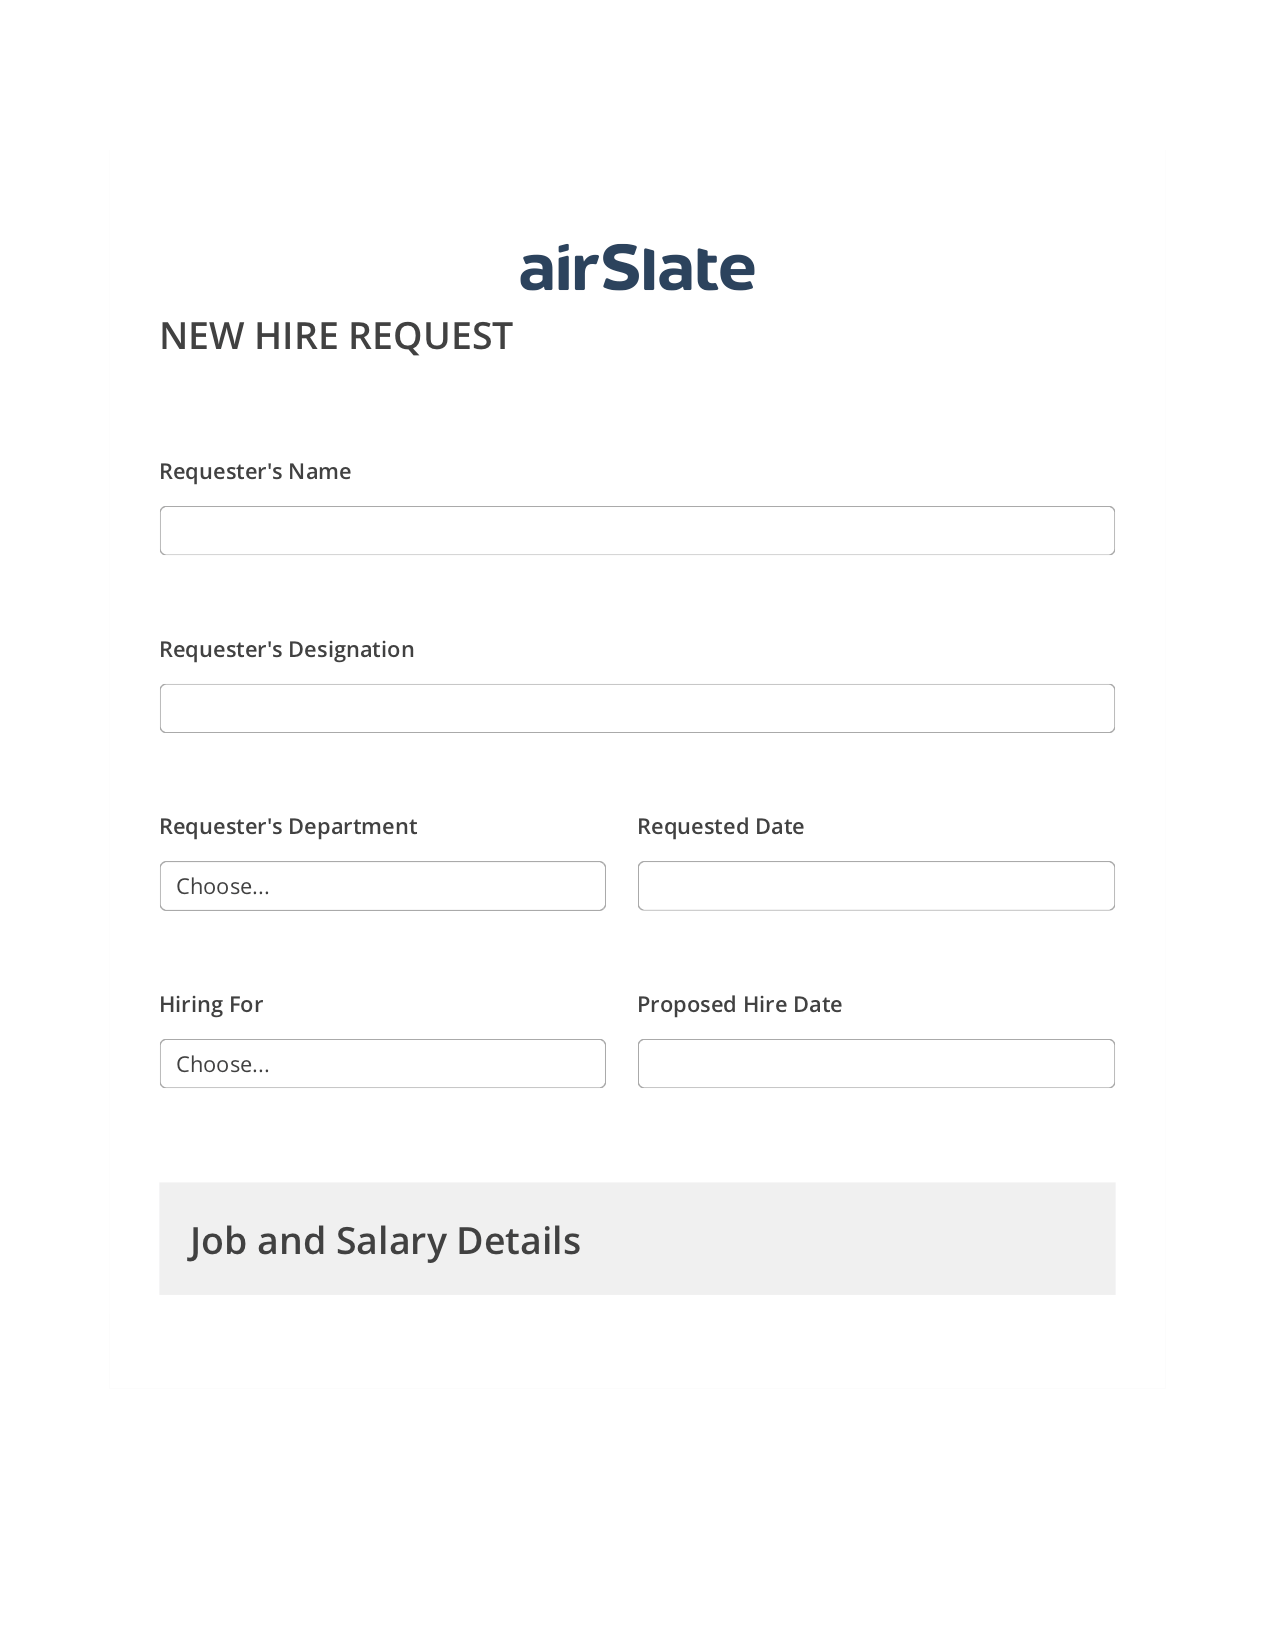 Hiring Request Workflow Prefill from NetSuite records, Send a Slate with Roles Bot, Export to Smartsheet